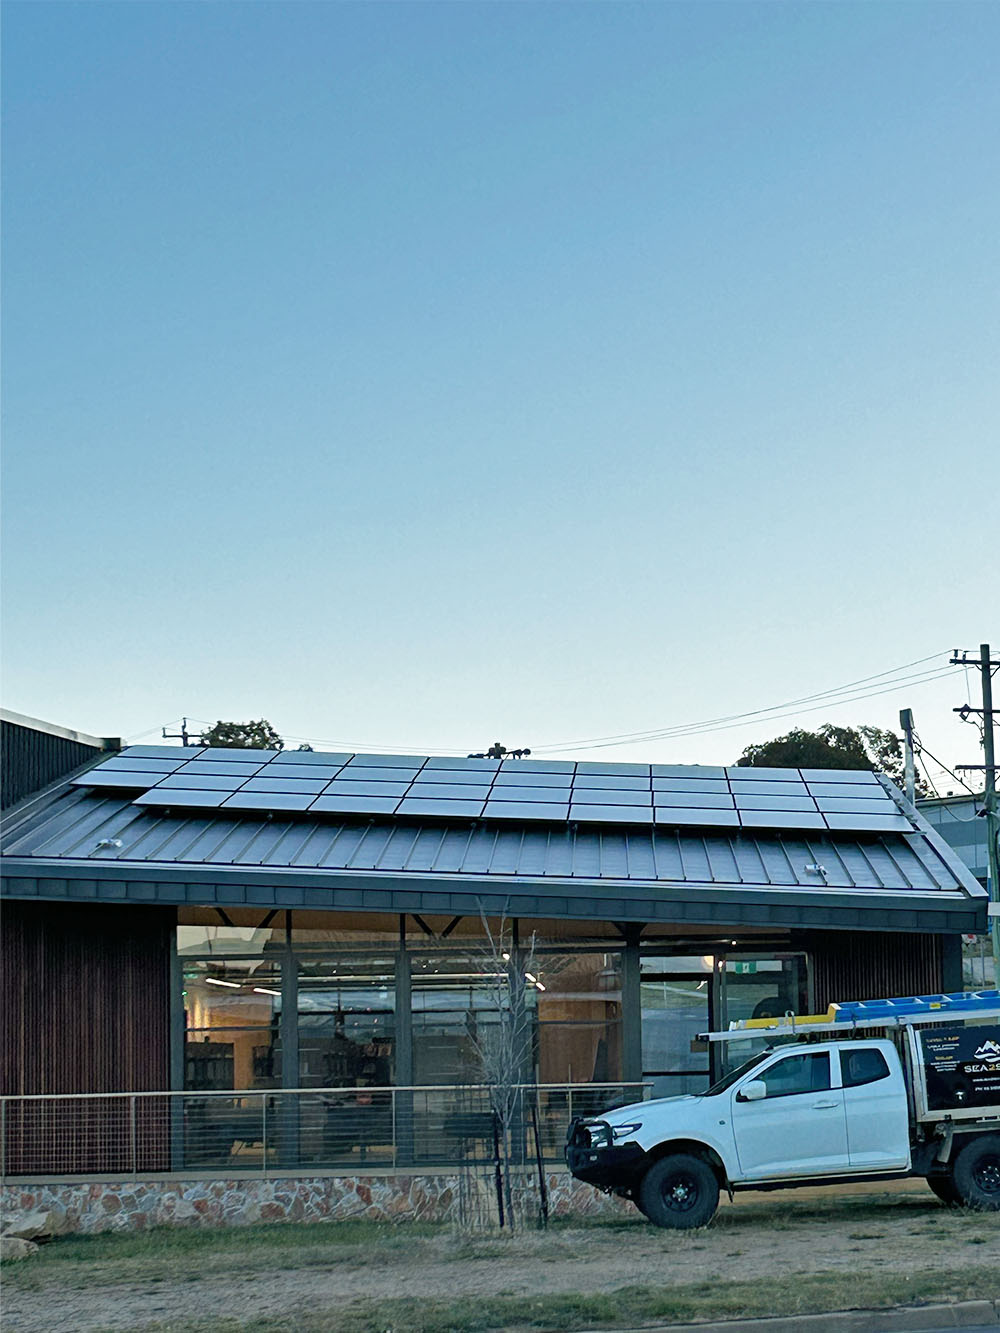 Looking towards the solar panels at Jindabyne Library